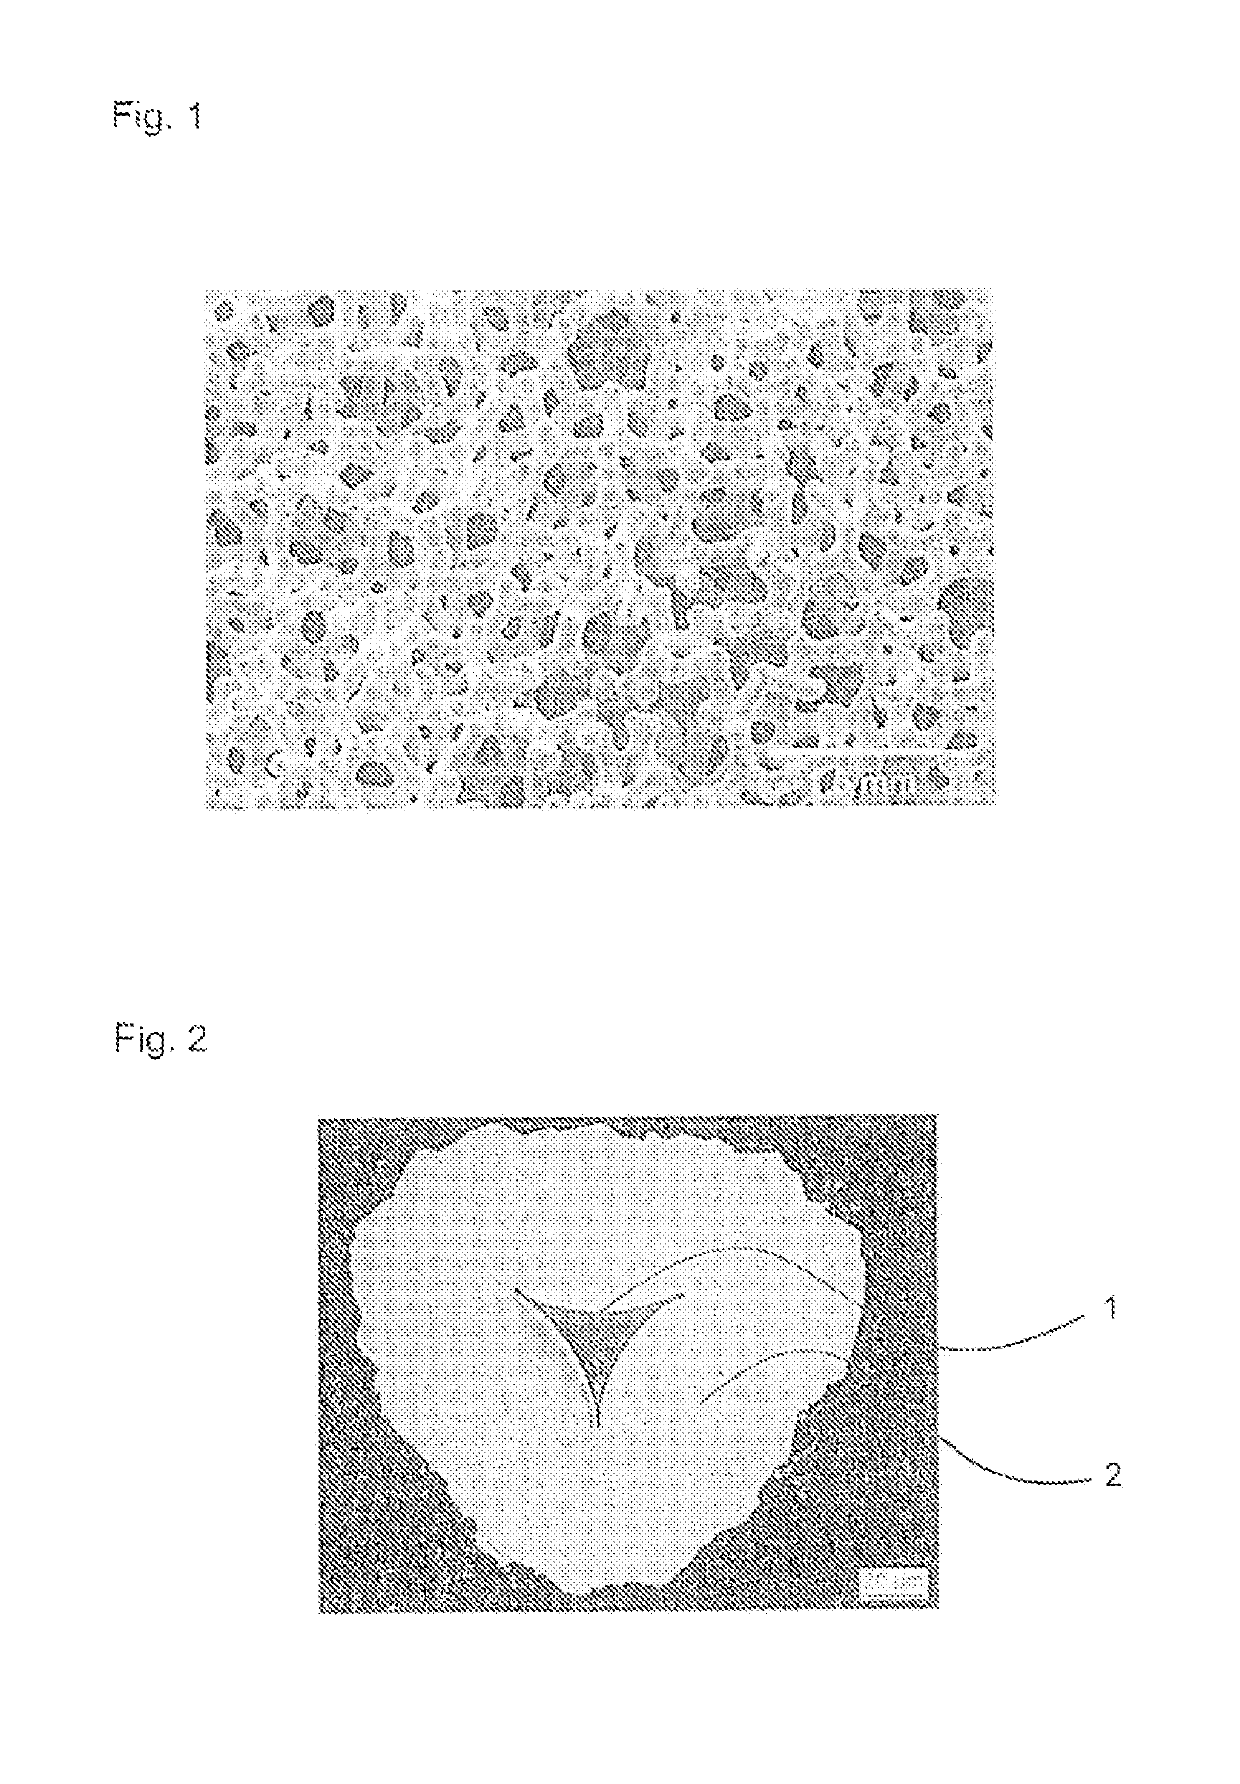 Ceramic bone substitute material and method for the production thereof